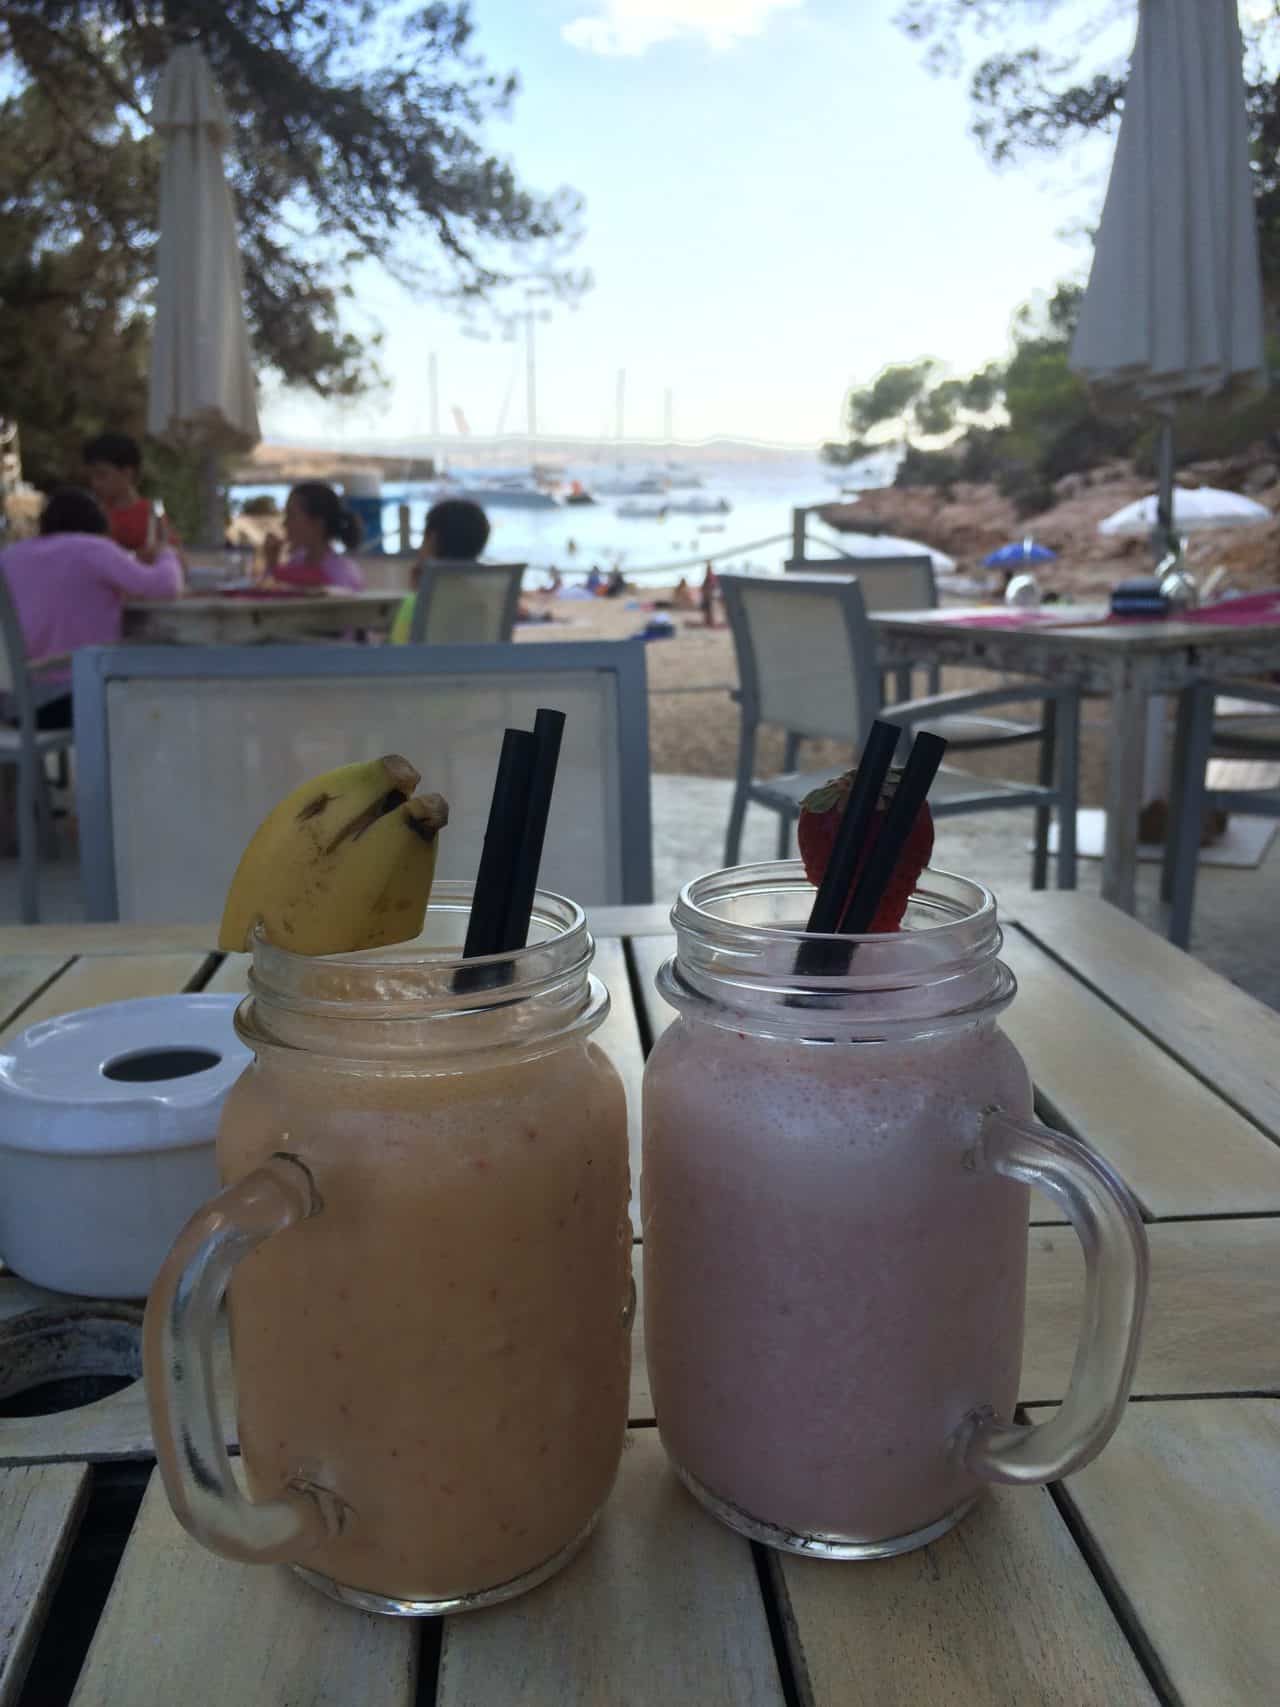 Banana Smoothie And Strawberry Smoothie With Straw On A Wooden Table With Beach As Background